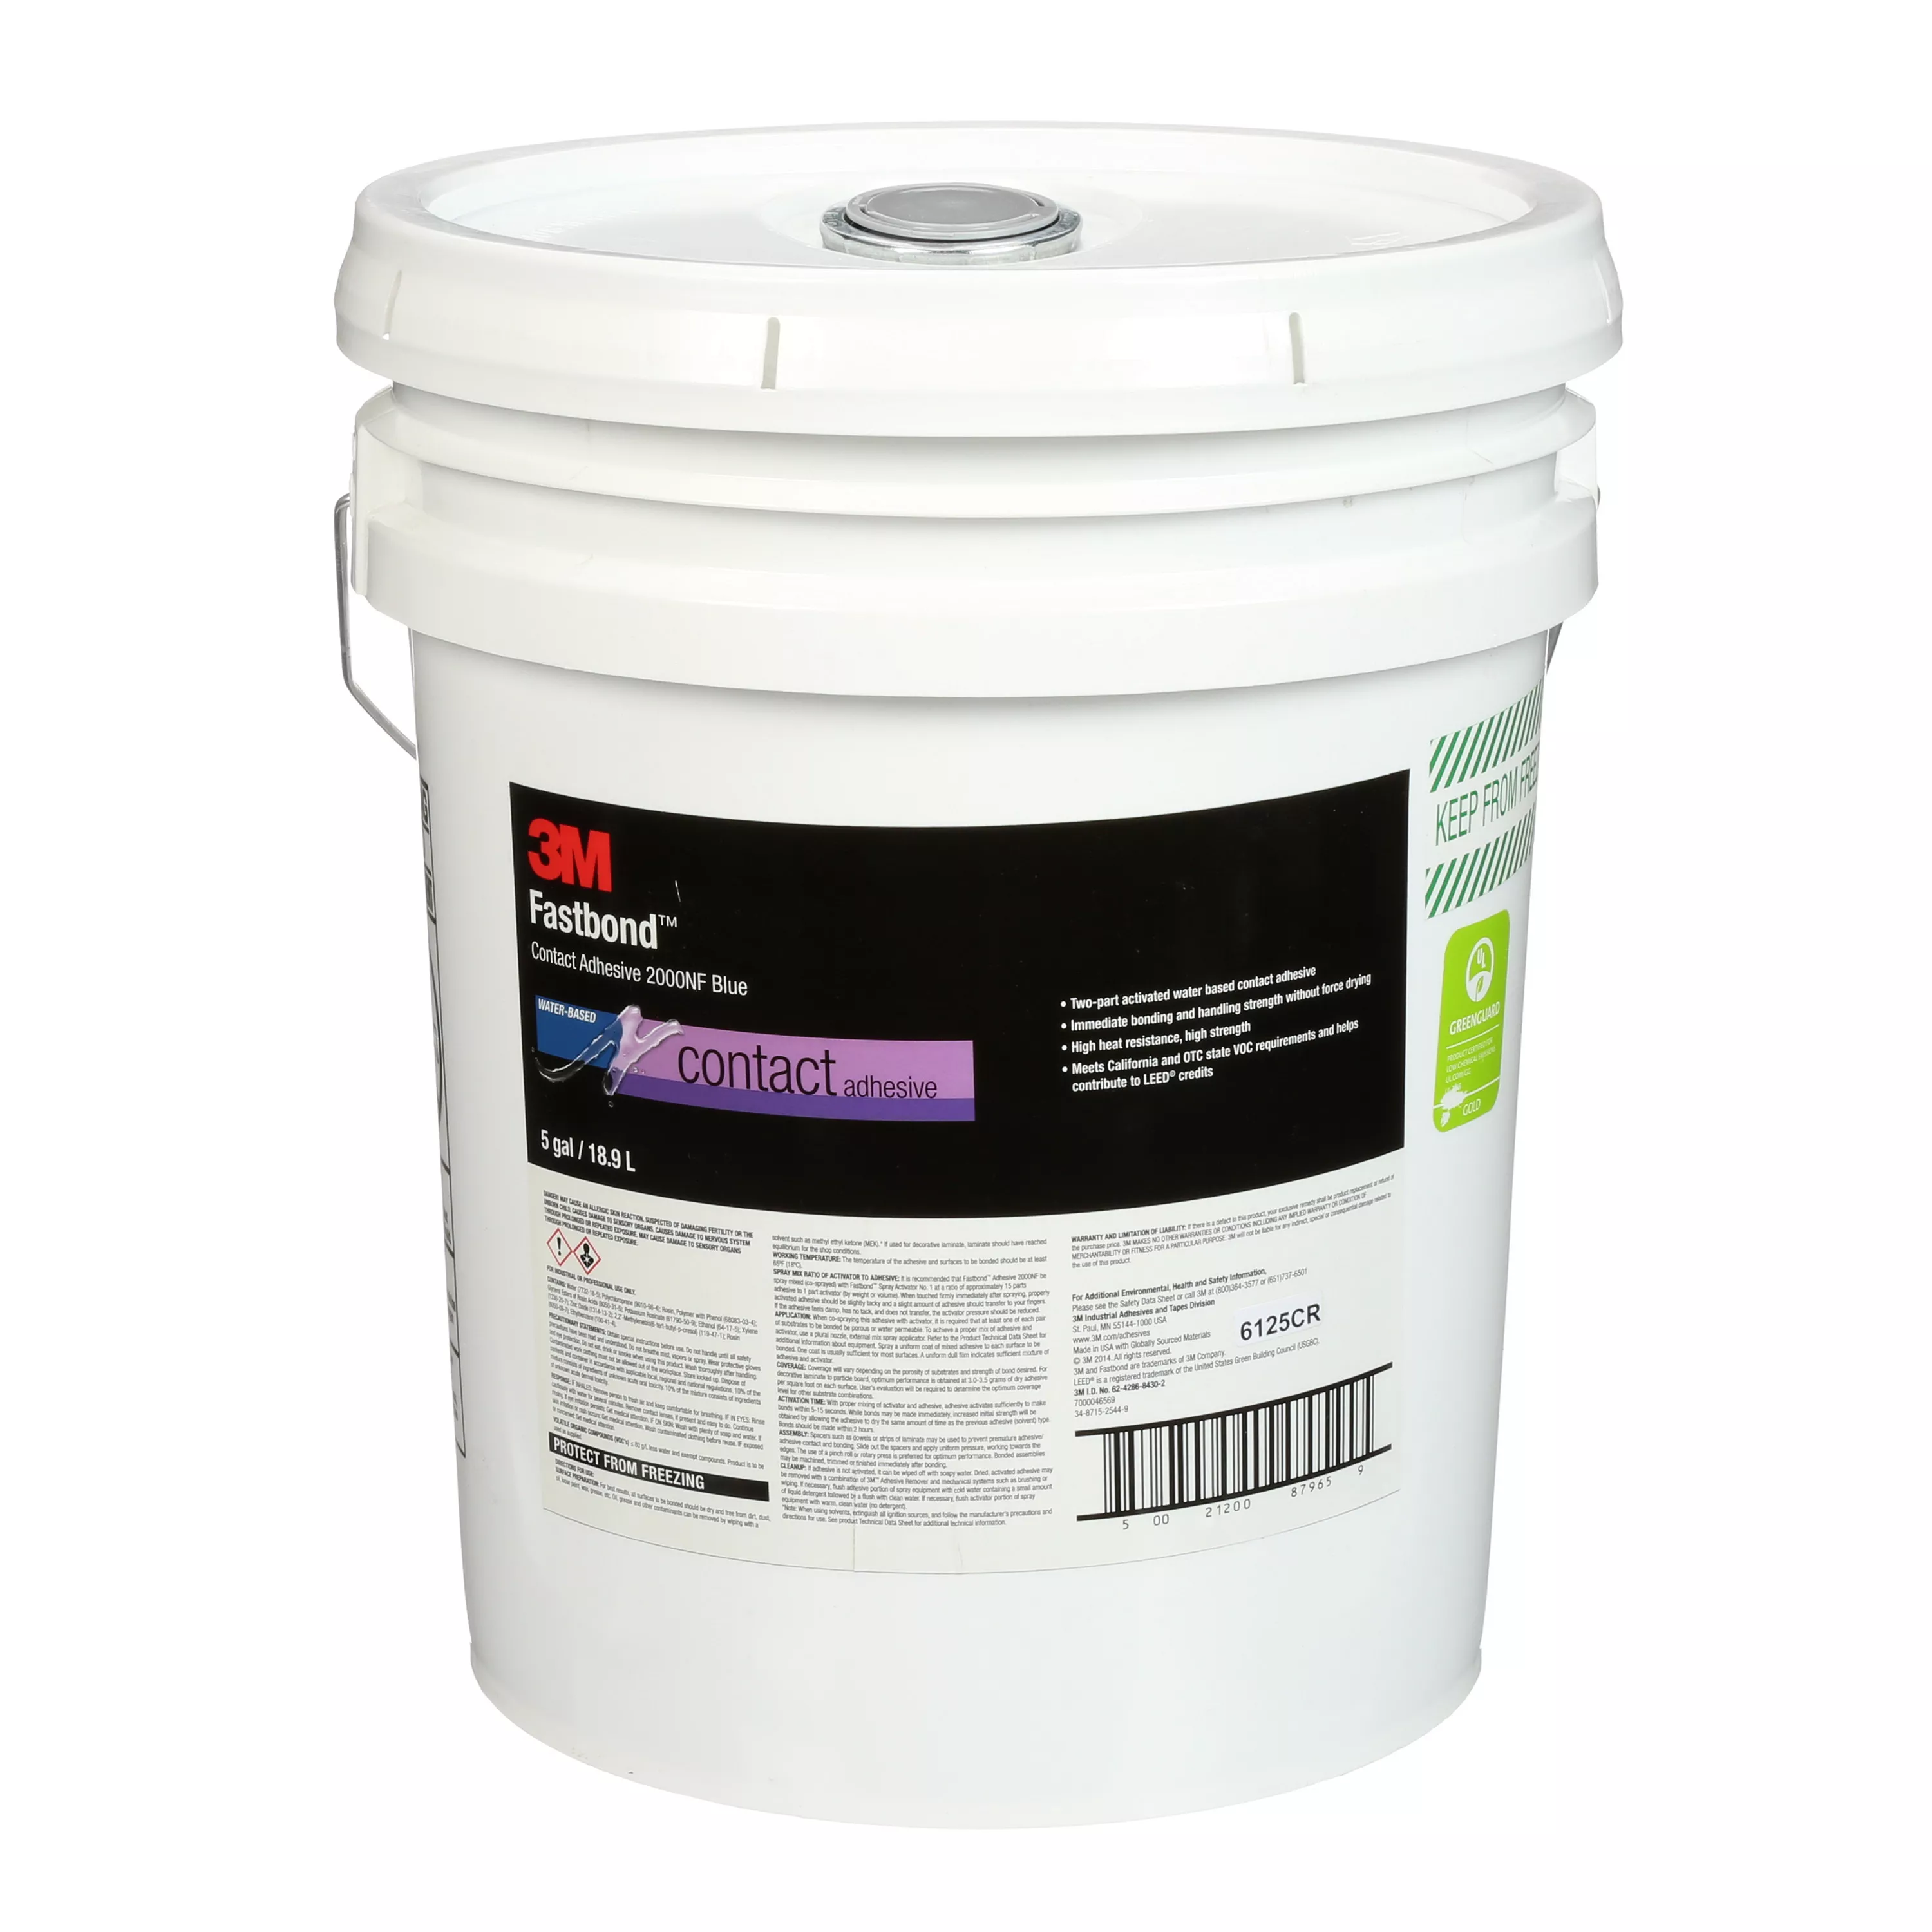 3M™ Fastbond™ Contact Adhesive 2000NF, Blue, 5 Gallon Poly Pour Spout, 1
Can/Drum